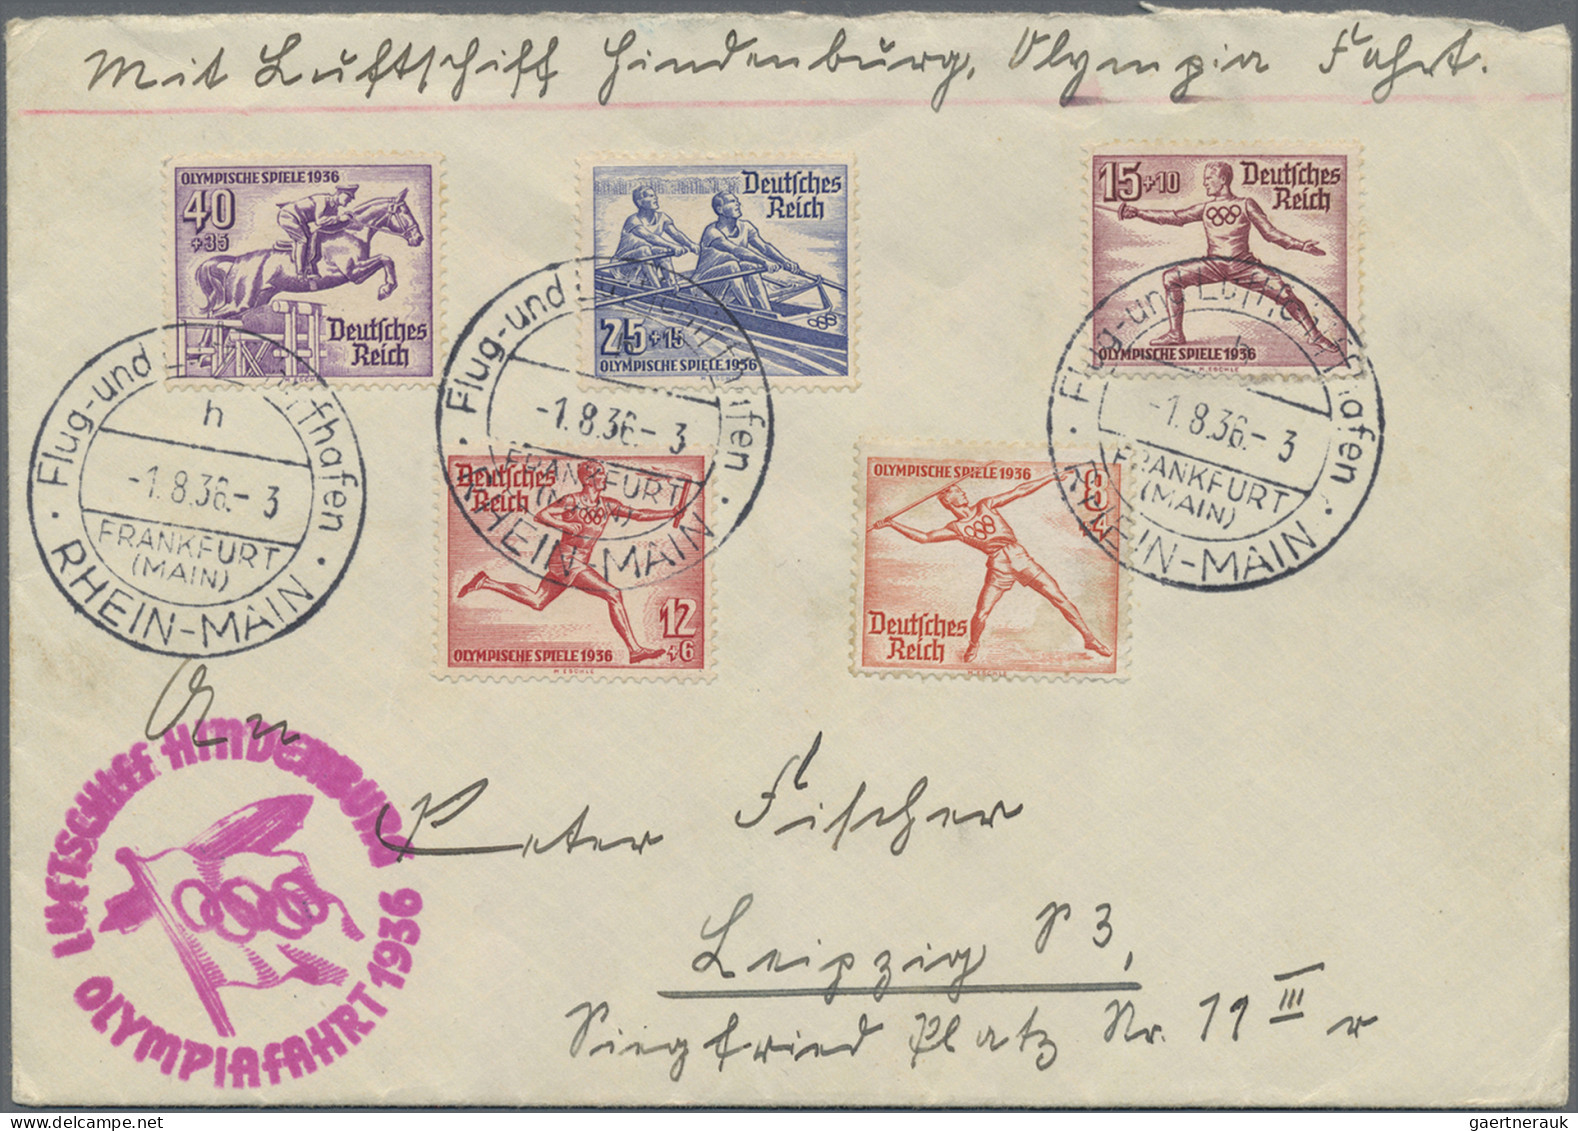 Zeppelin Mail - Germany: 1936, Three Zeppelin covers for the 1936 Olympic trip (